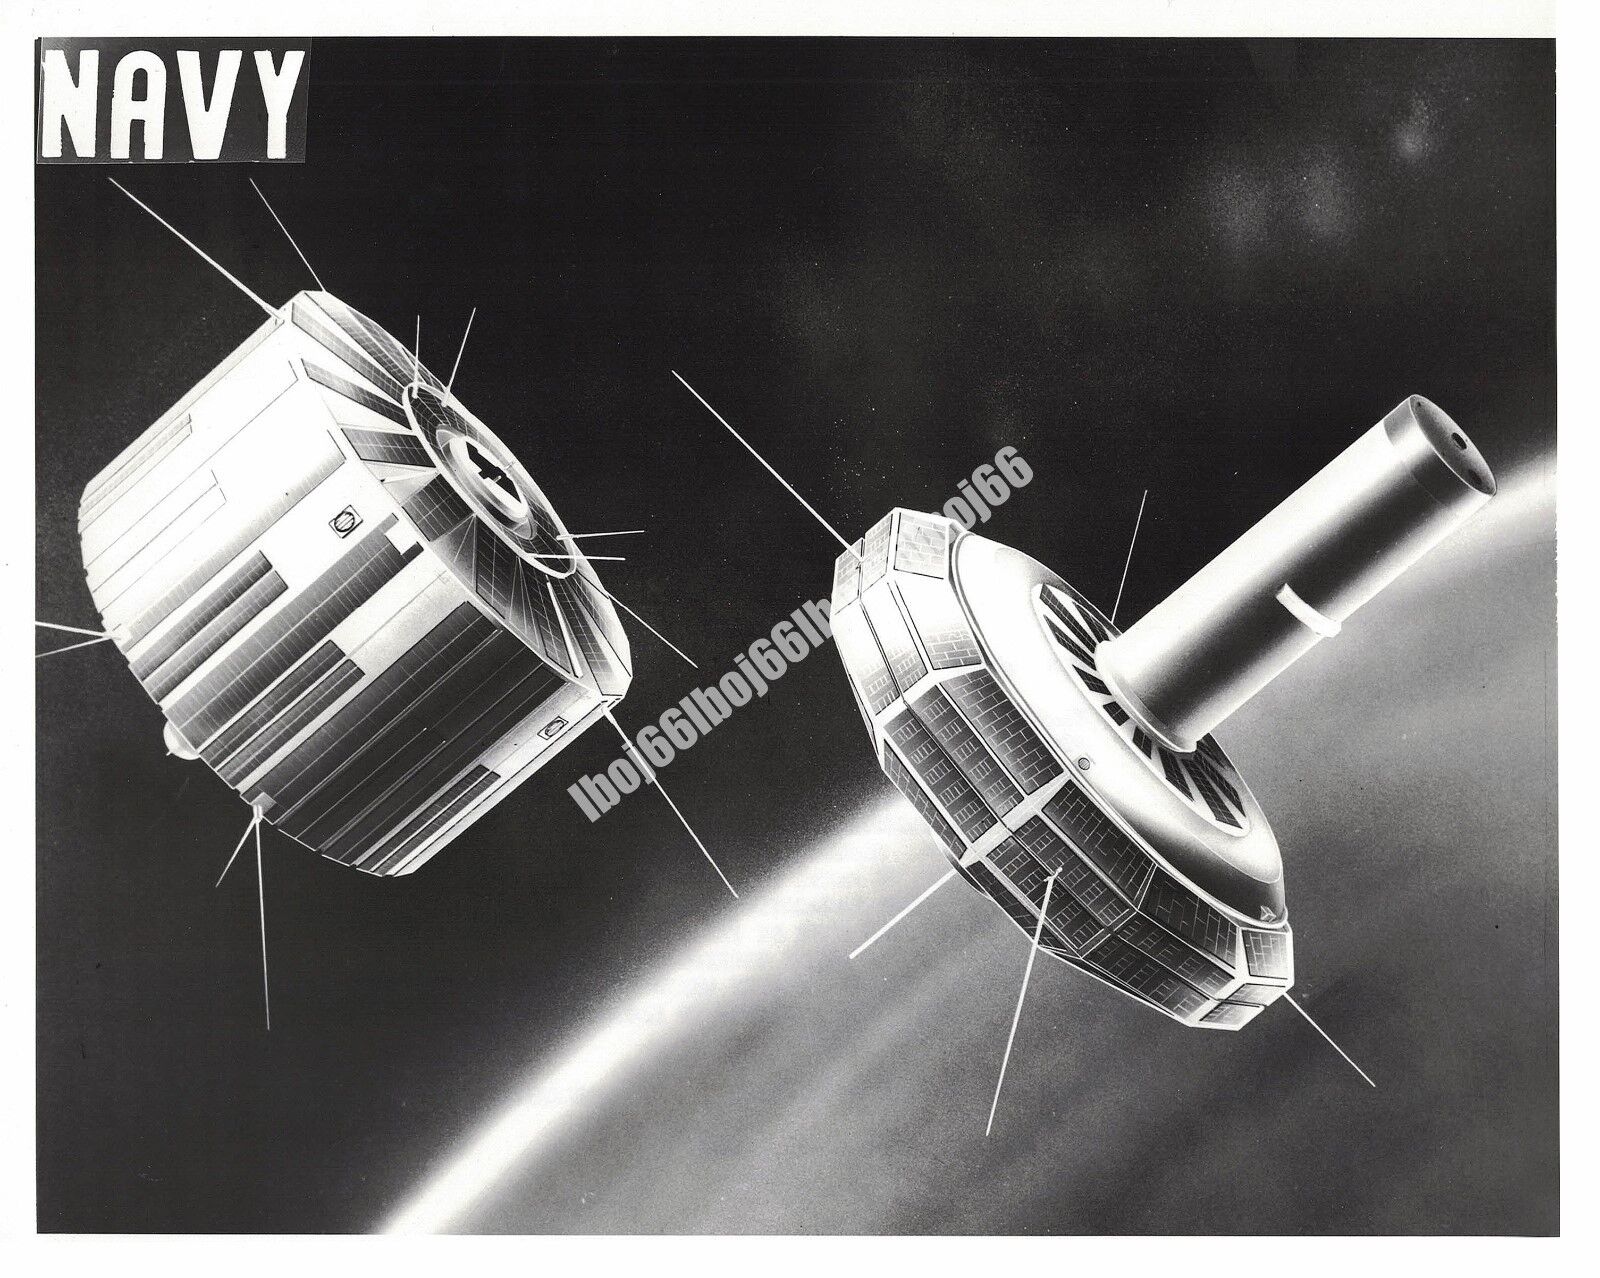 Vintage 8X10 Official US Navy Photograph 1959 Art Conception Navy Satellite